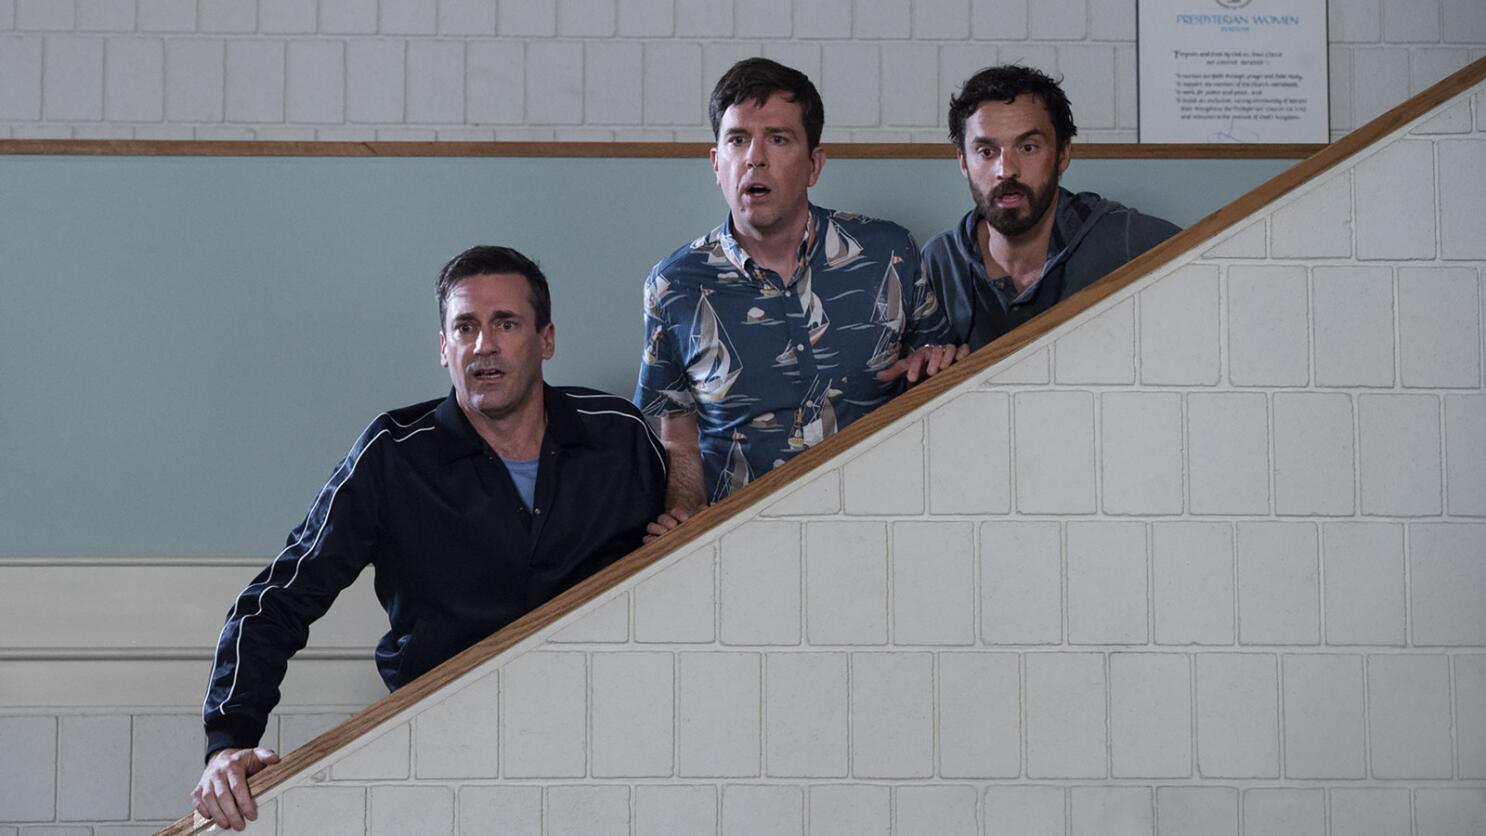 Jon Hamm, Jeremy Renner Play a Super-Silly Game of 'Tag': Review